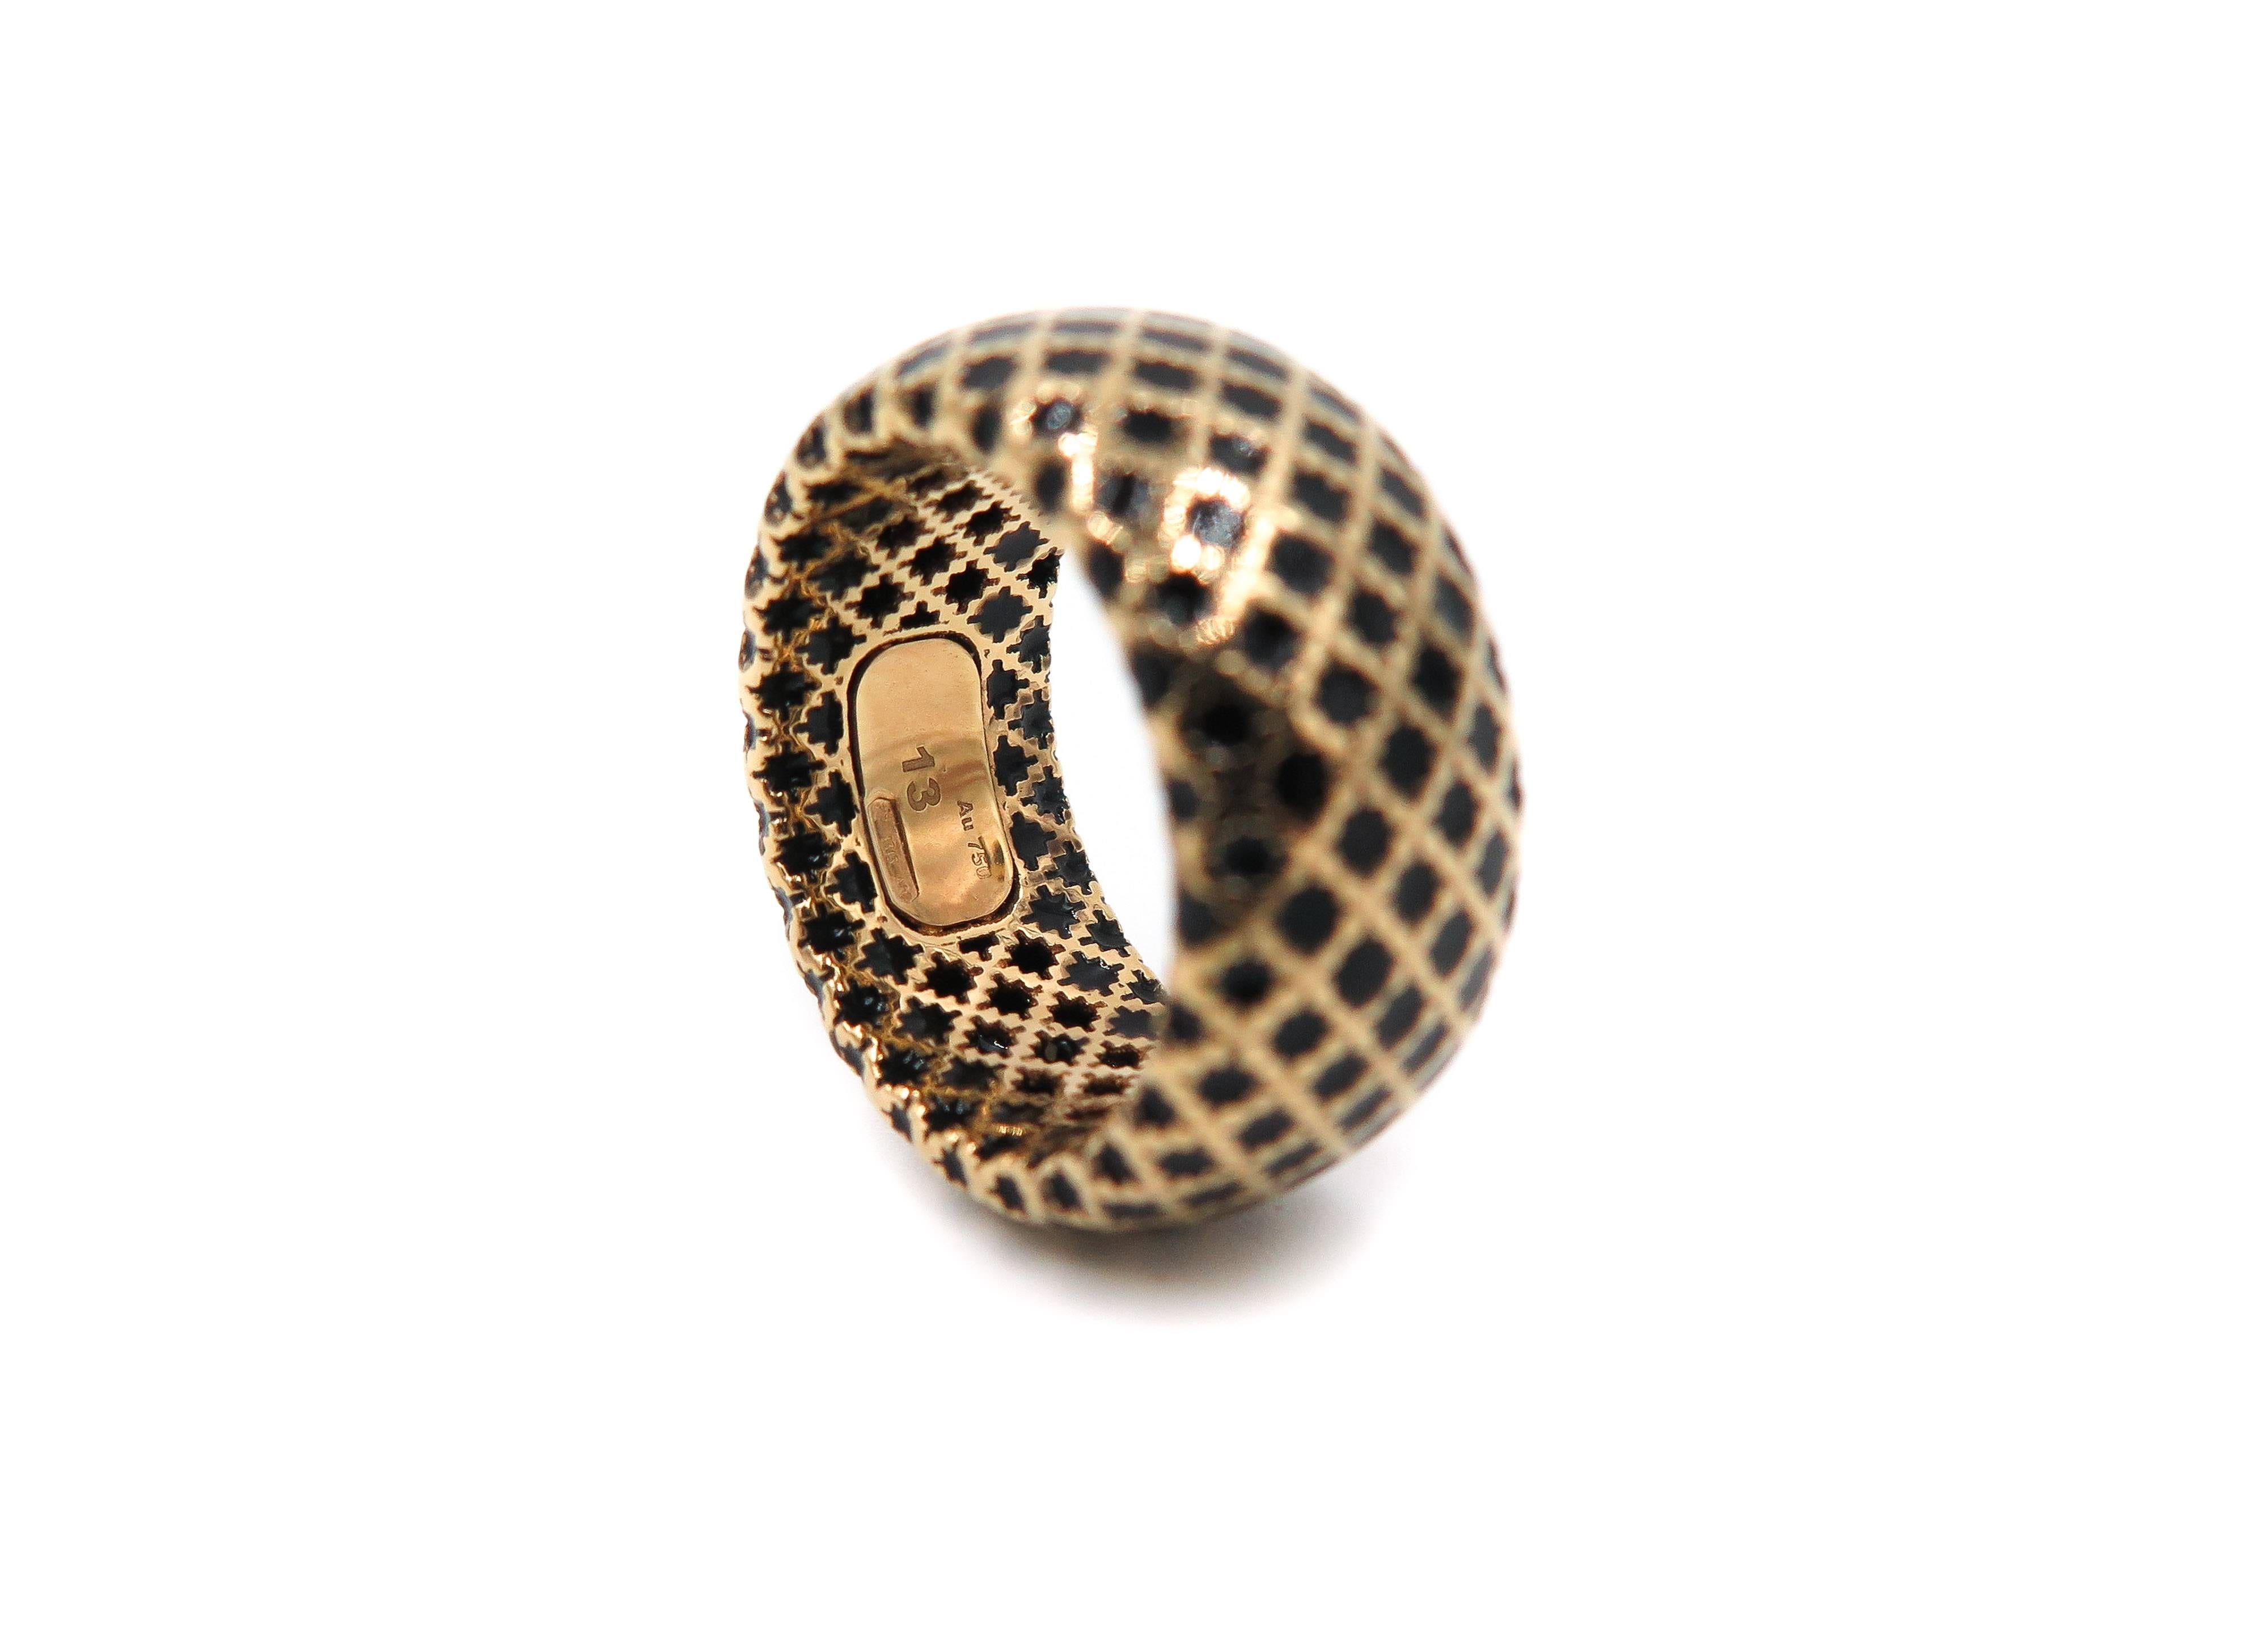 Authentic Italian designed and handcrafted in 18K yellow gold Gucci Diamantissima ring featuring enamel, signature lattices and a high polish finish throughout. 
Finger size 6 in original box.
 